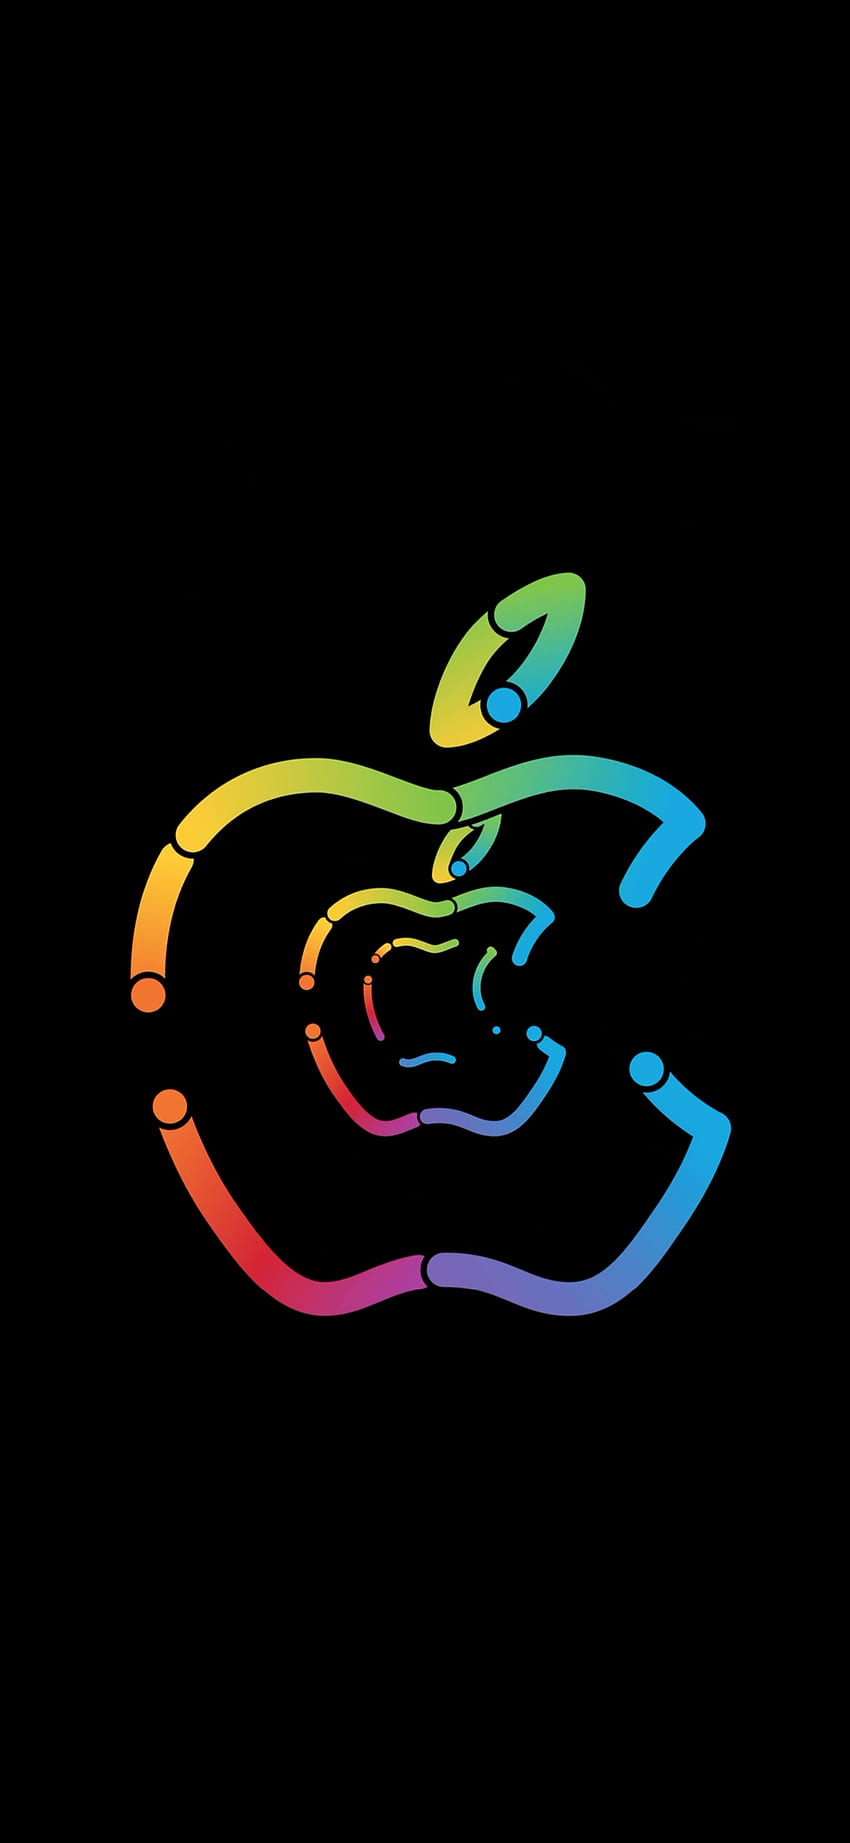 Apple Logo Animation iPhone 11 Promotional [LIVE ] - Central HD phone wallpaper